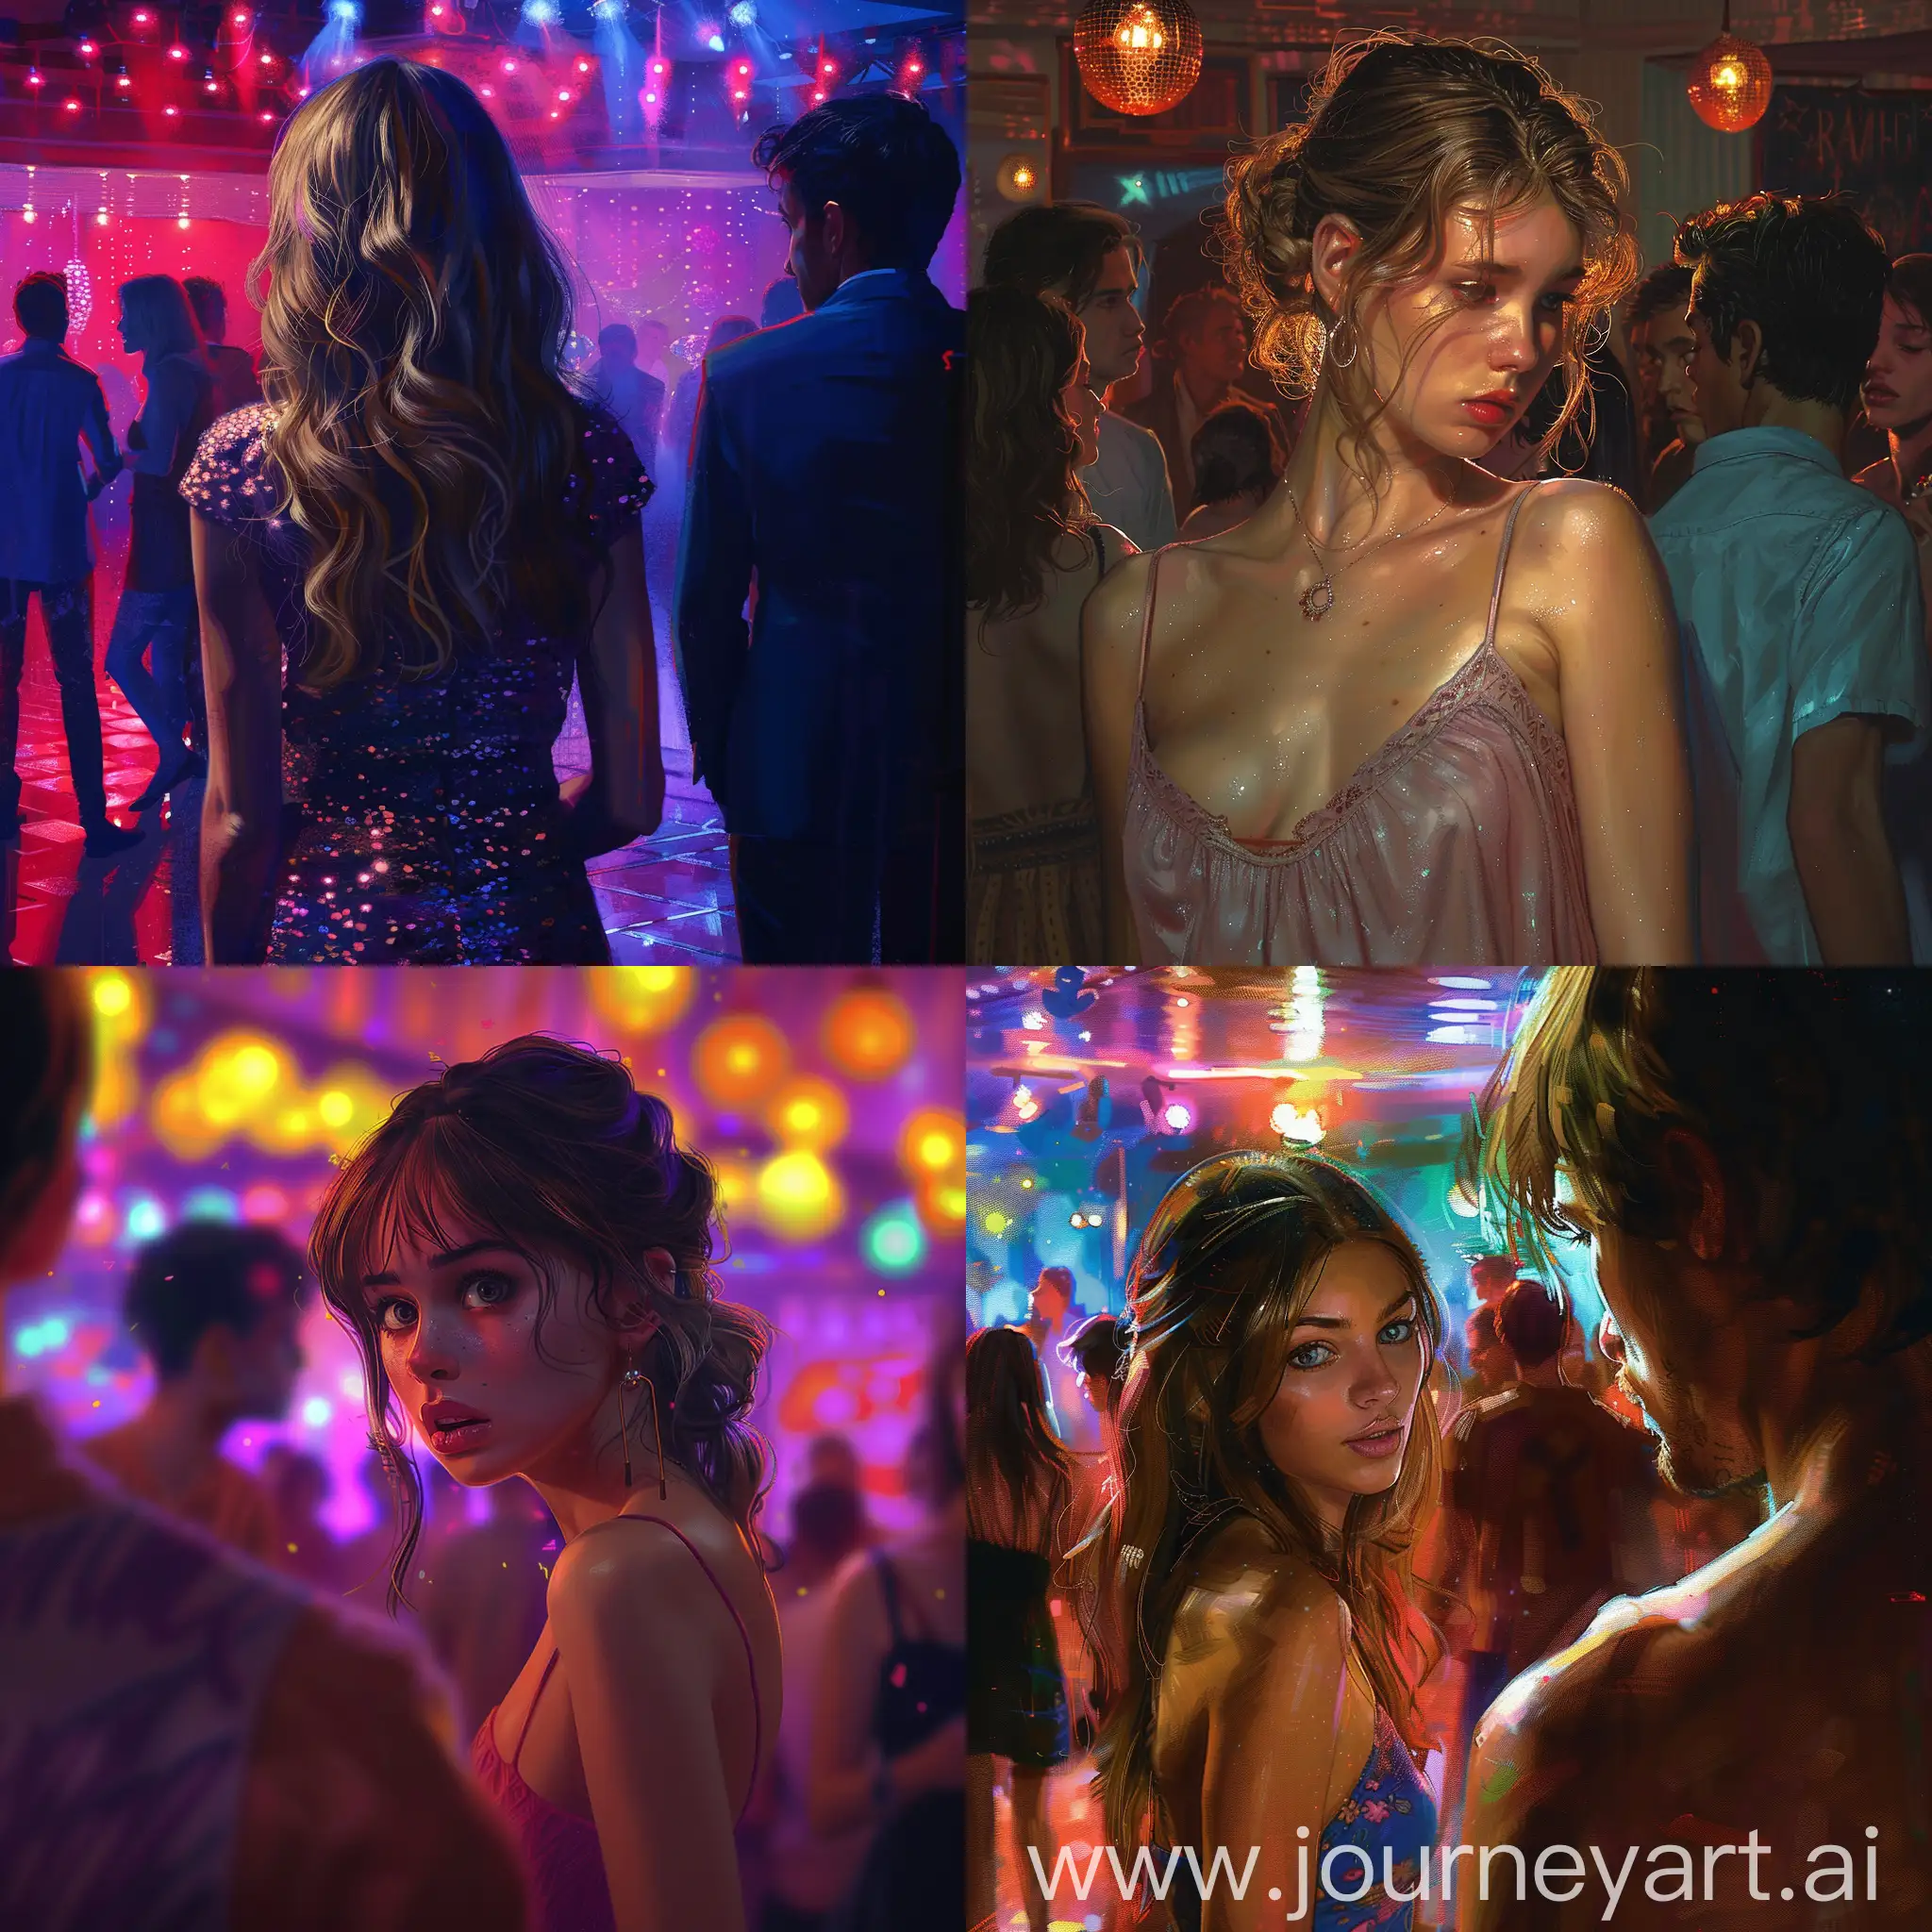 Energetic-Nightlife-Quest-Girl-Searching-for-Guy-at-Disco